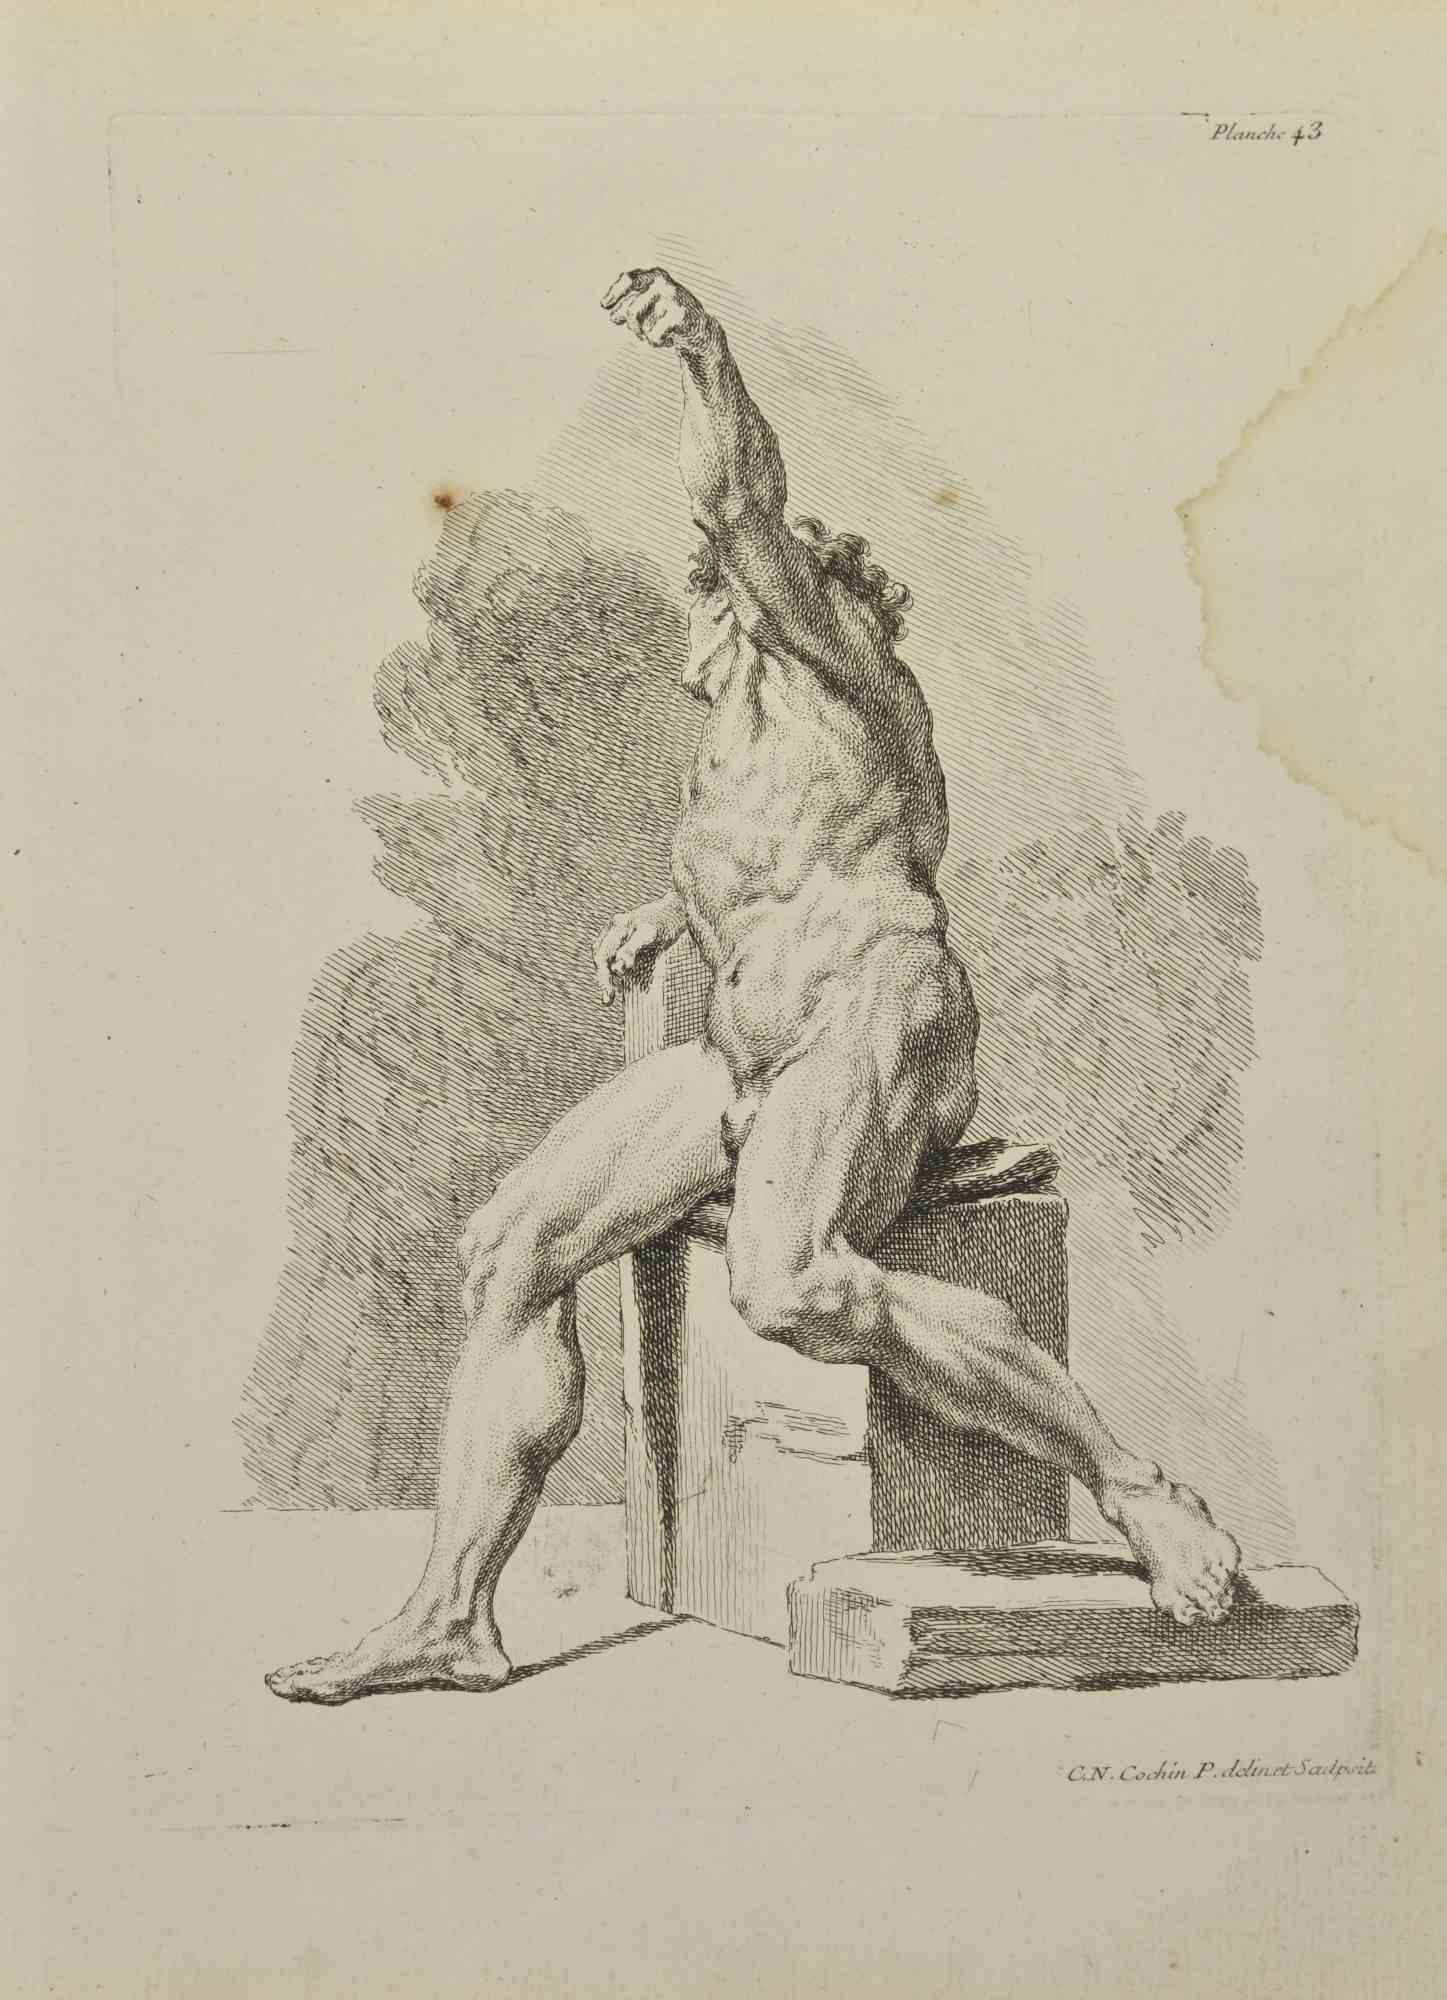 Anatomy Studies is an etching realized by Nicholas Cochin in 1755.

Good conditions with foxing and folding.

Signed in the plate.

The artwork is depicted through confident strokes.

The etching was realized for the anatomy study “JOMBERT,